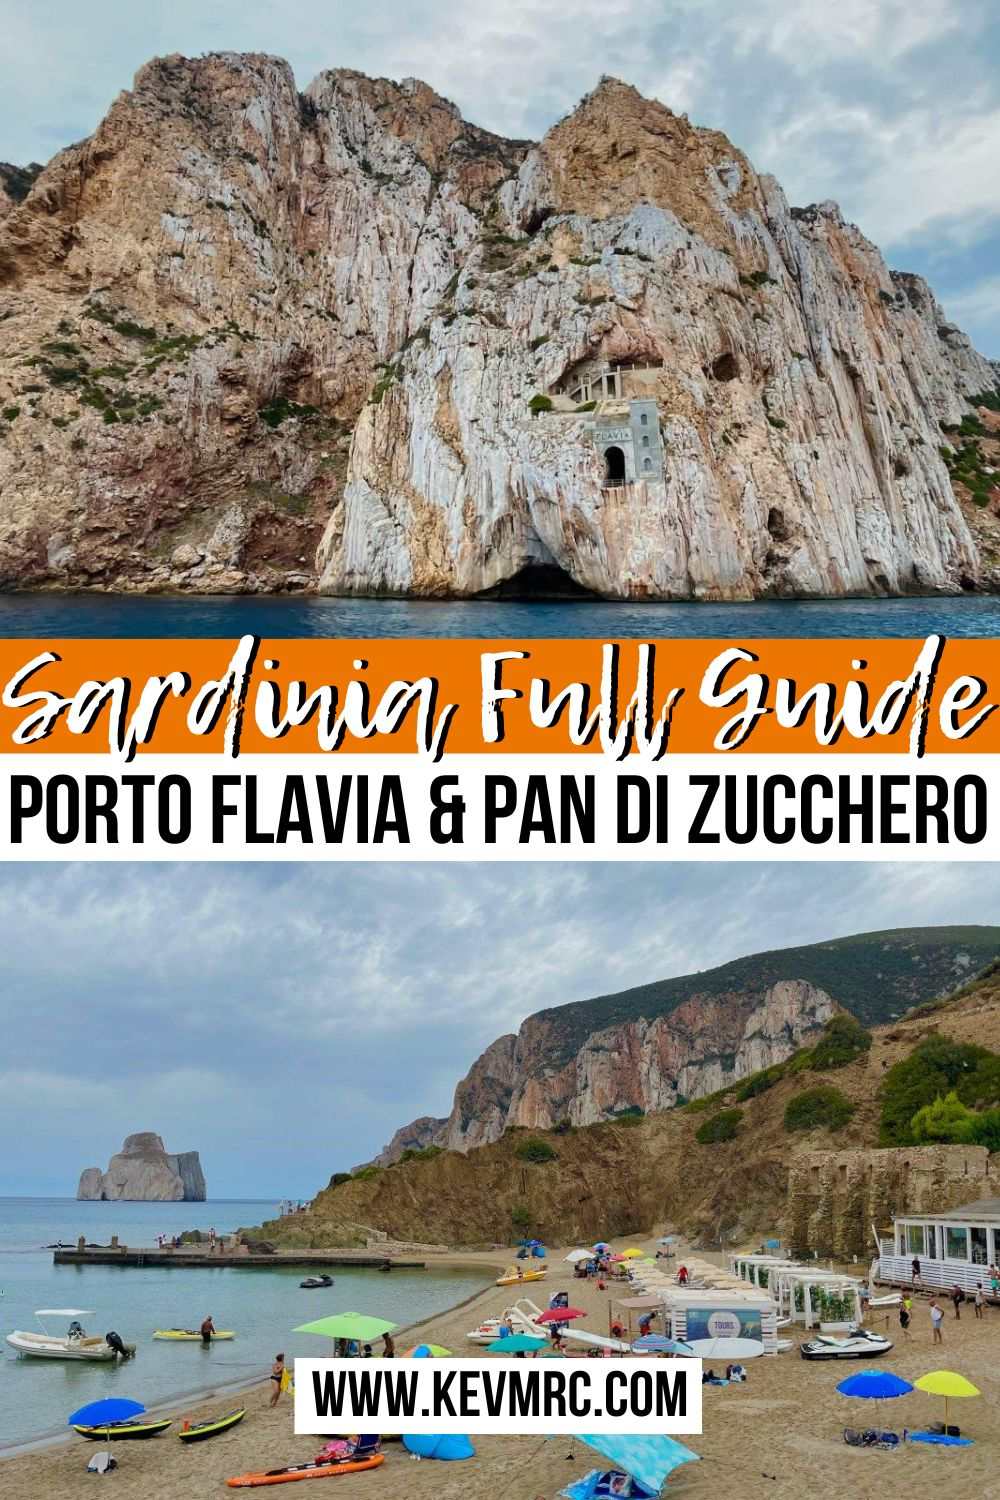 In this guide, find all the information you need to explore Masua Pan di Zucchero and Porto Flavia in Sardinia, Italy. porto flavia sardegna | porto flavia italy | sardinia italy porto flavia | porto flavia sardinia | pan di zucchero sardinia | sardinia best places 